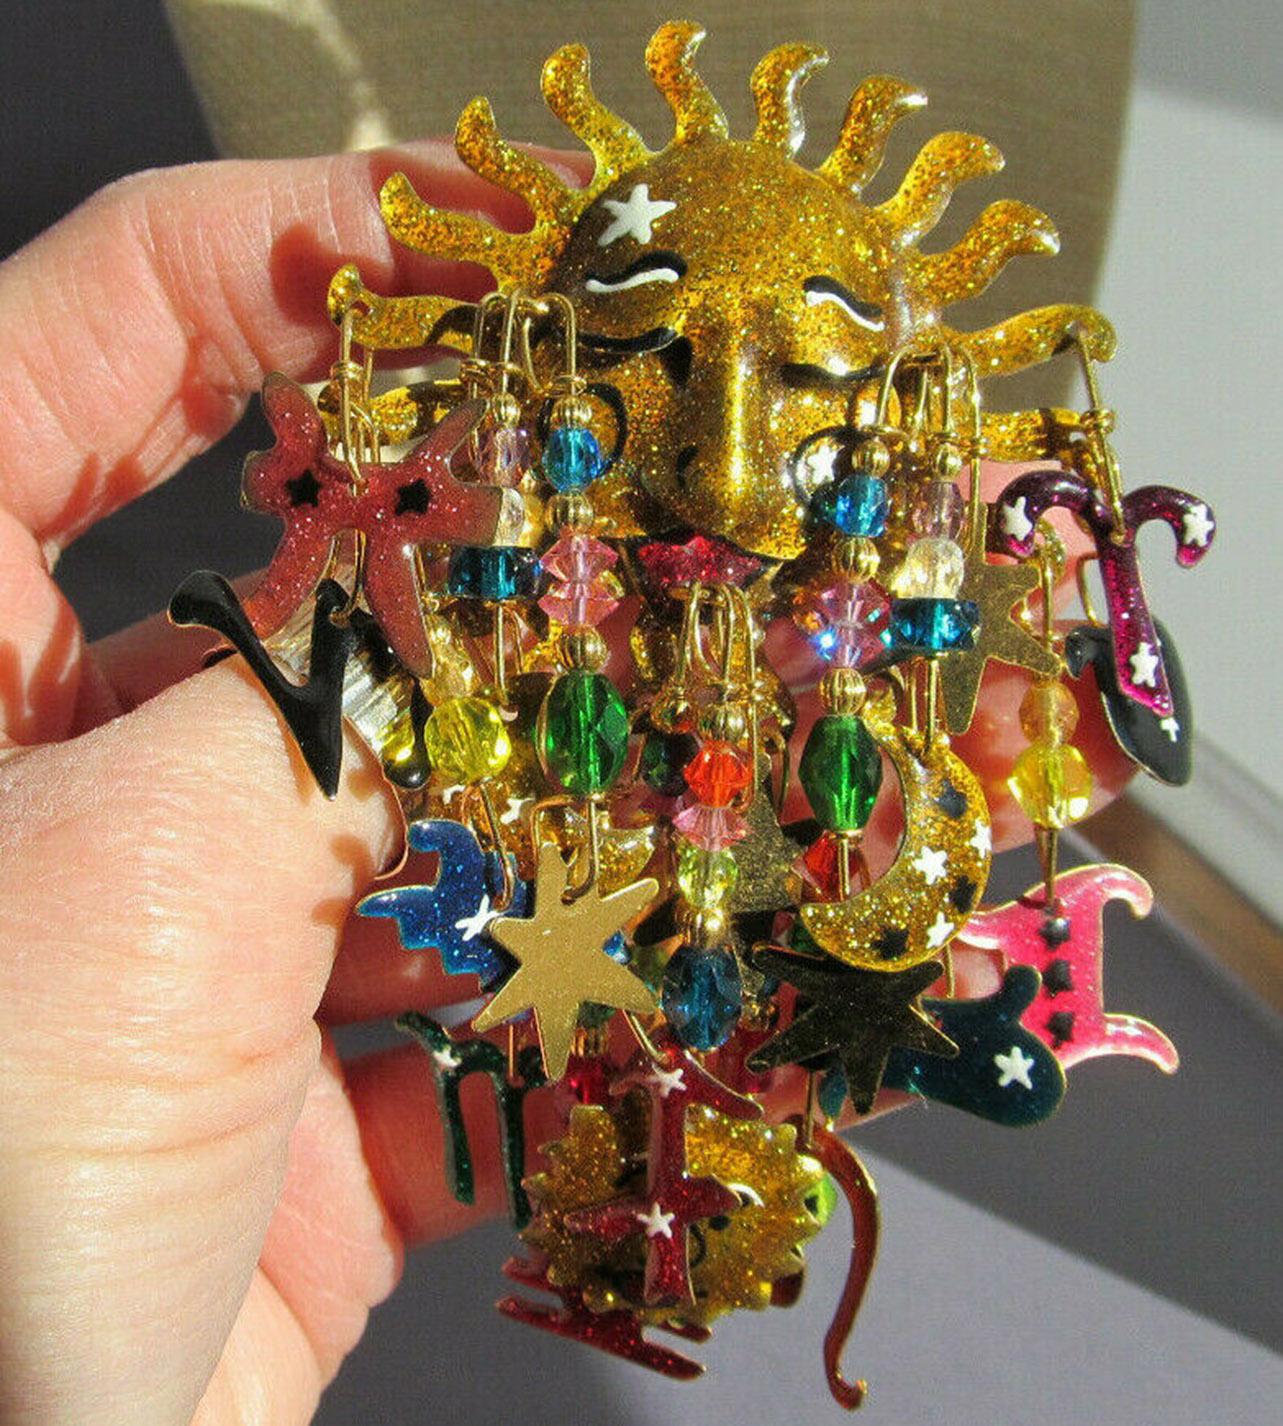 Large Funtabulous Enamel Celestial Sun Charm Dangle Designer Brooch signed: LUNCH AT THE RITZ; This “Fun in the Sun” brooch epitomizes vintage charm and personality! Measuring approx. 2